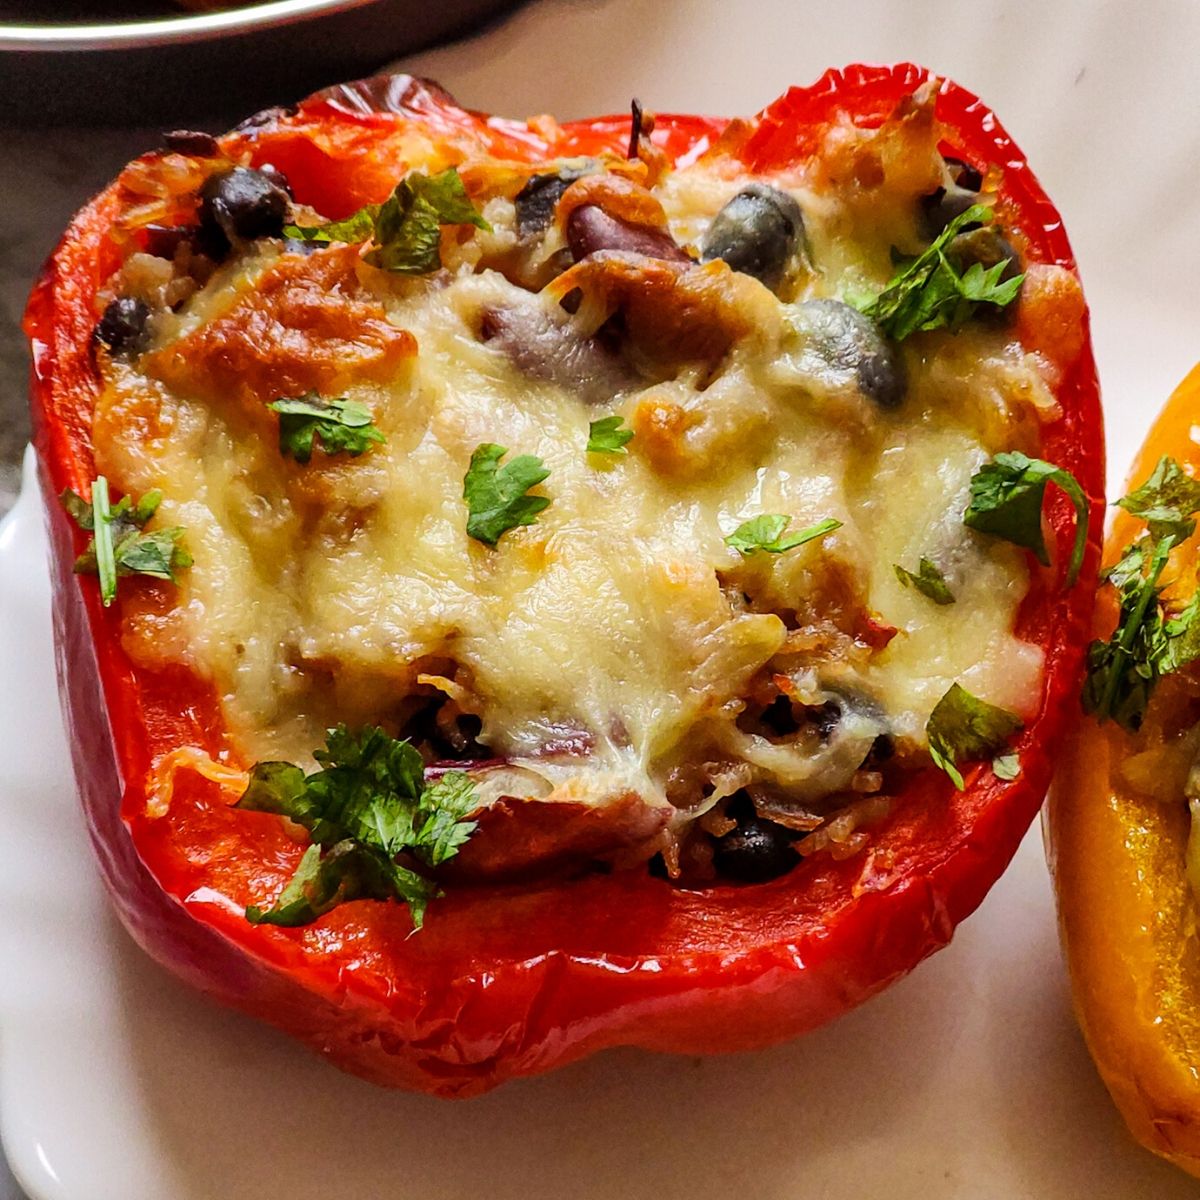 one piece of stuffed red bell pepper kept on a white plate and a small portion of yellow bell pepper also visible on the side